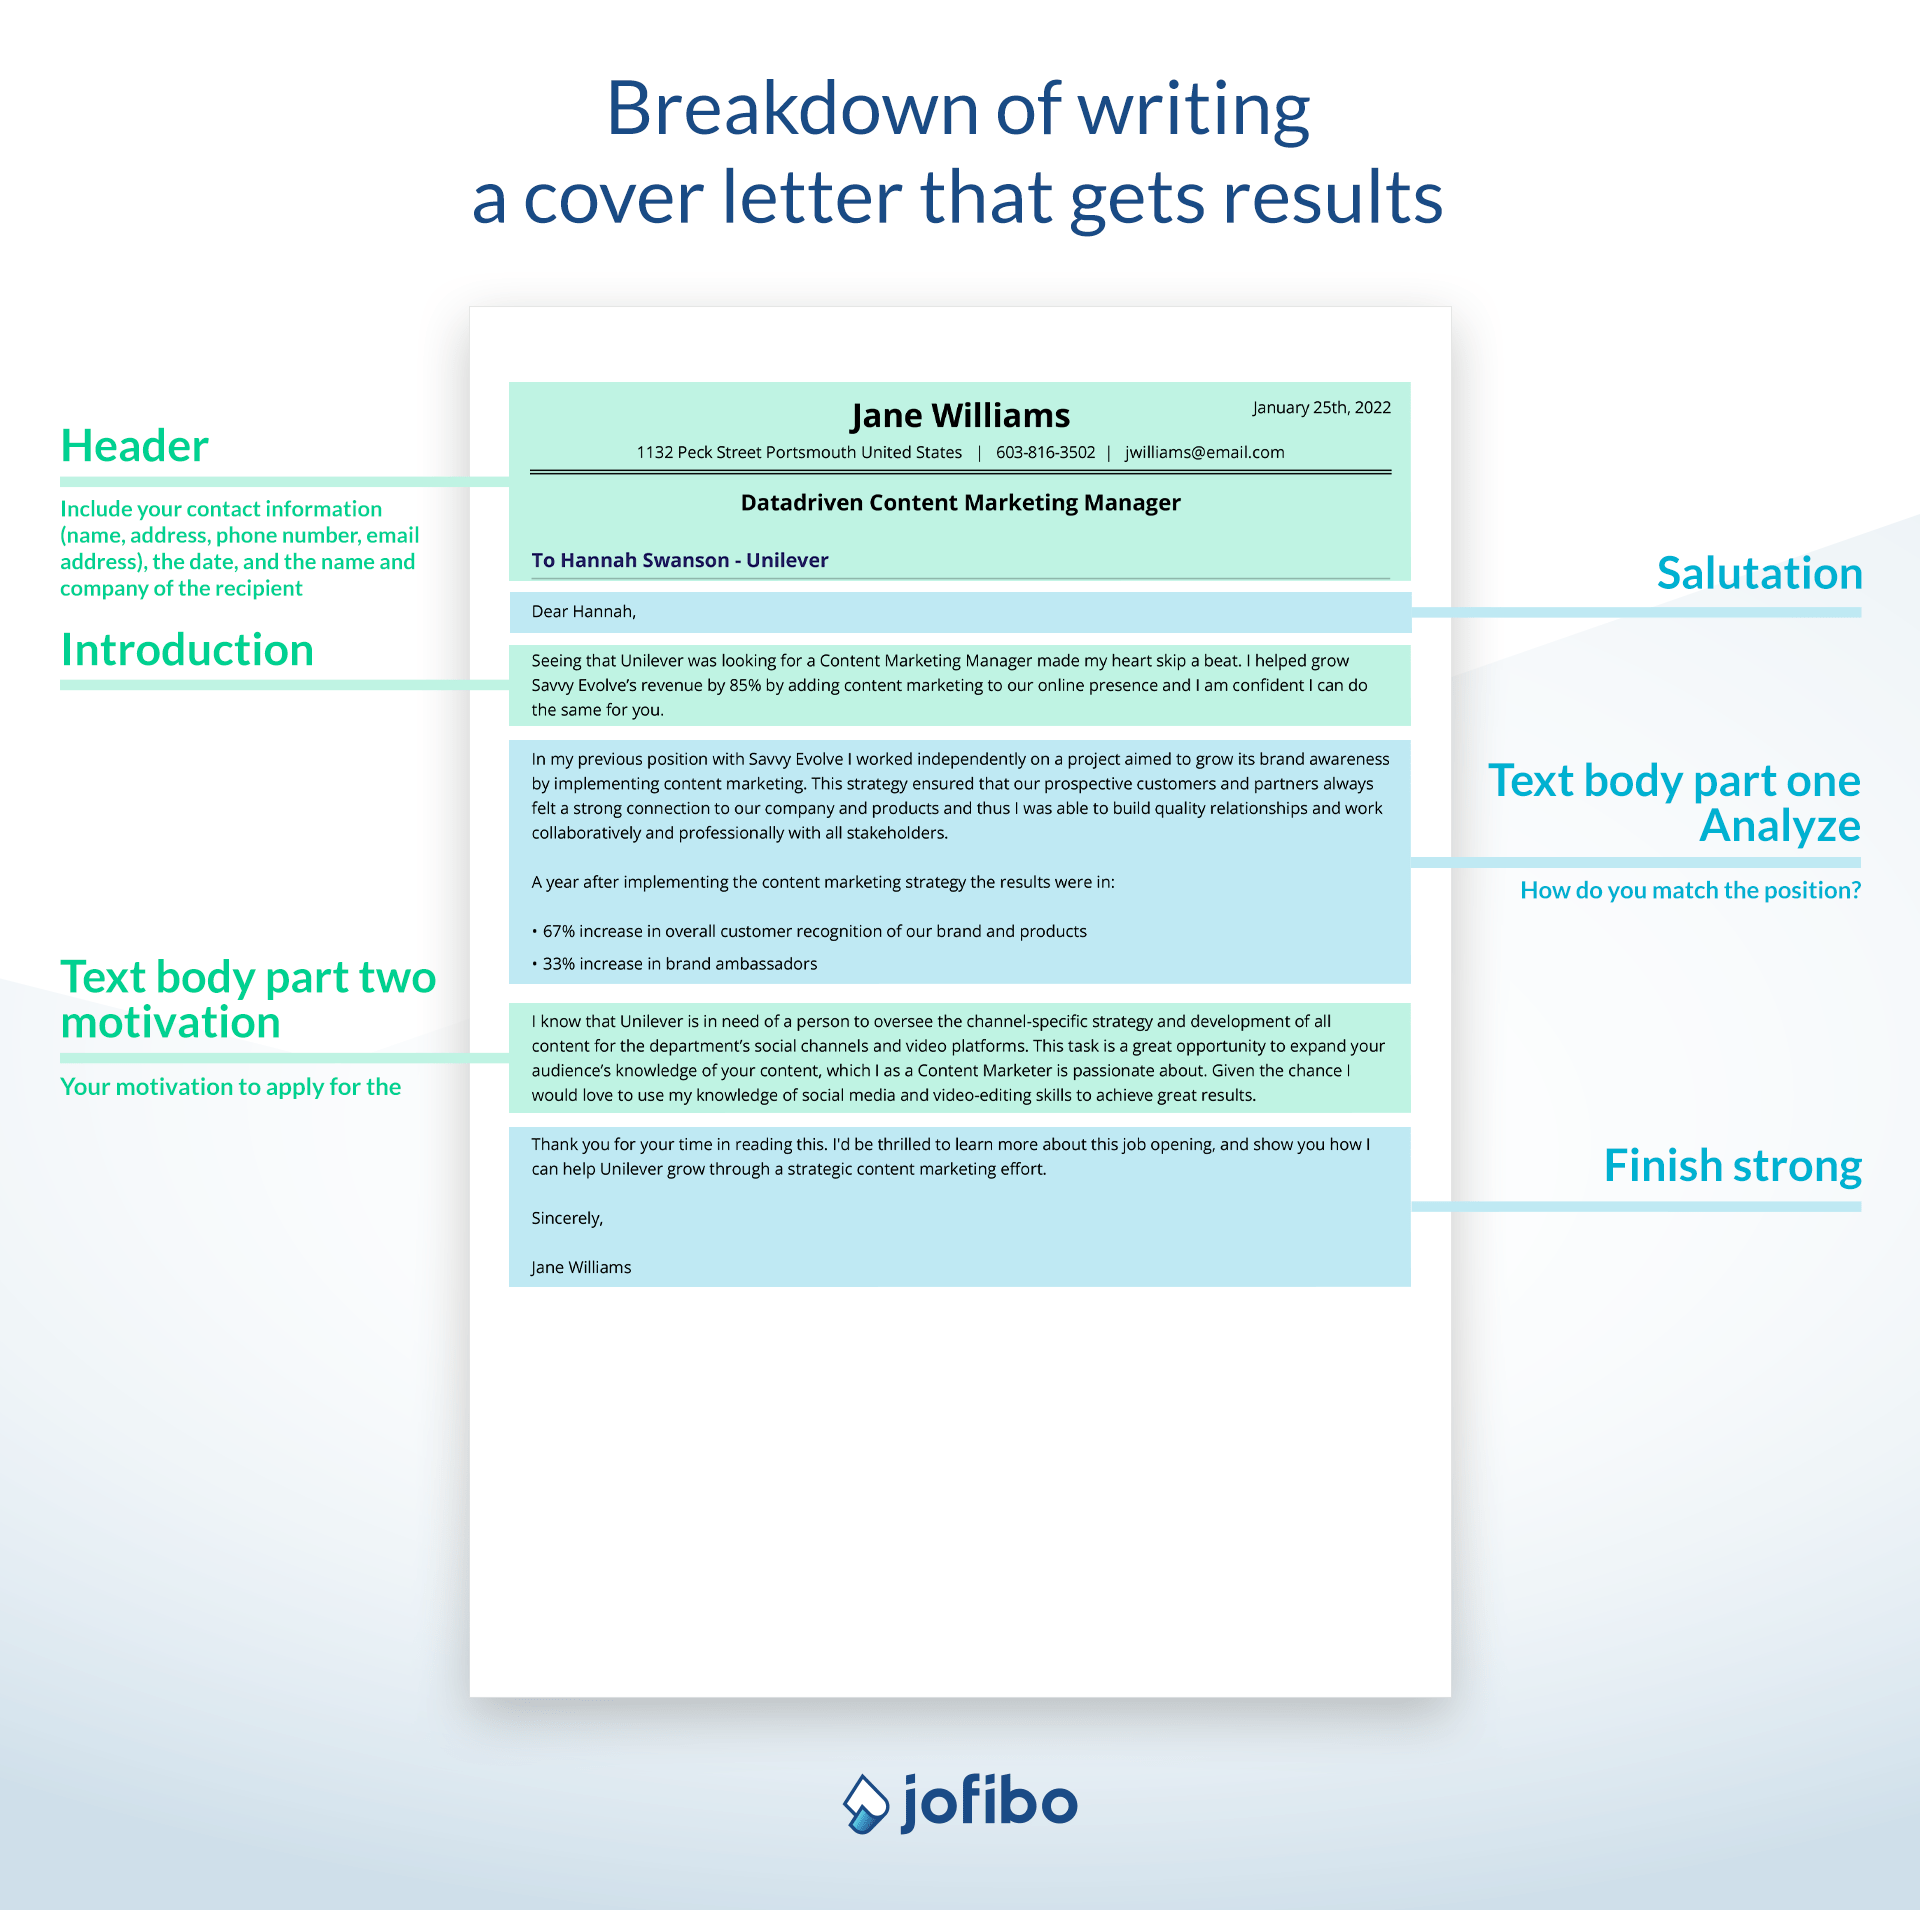 Infographic breakdown of how to write a cover letter that gets results